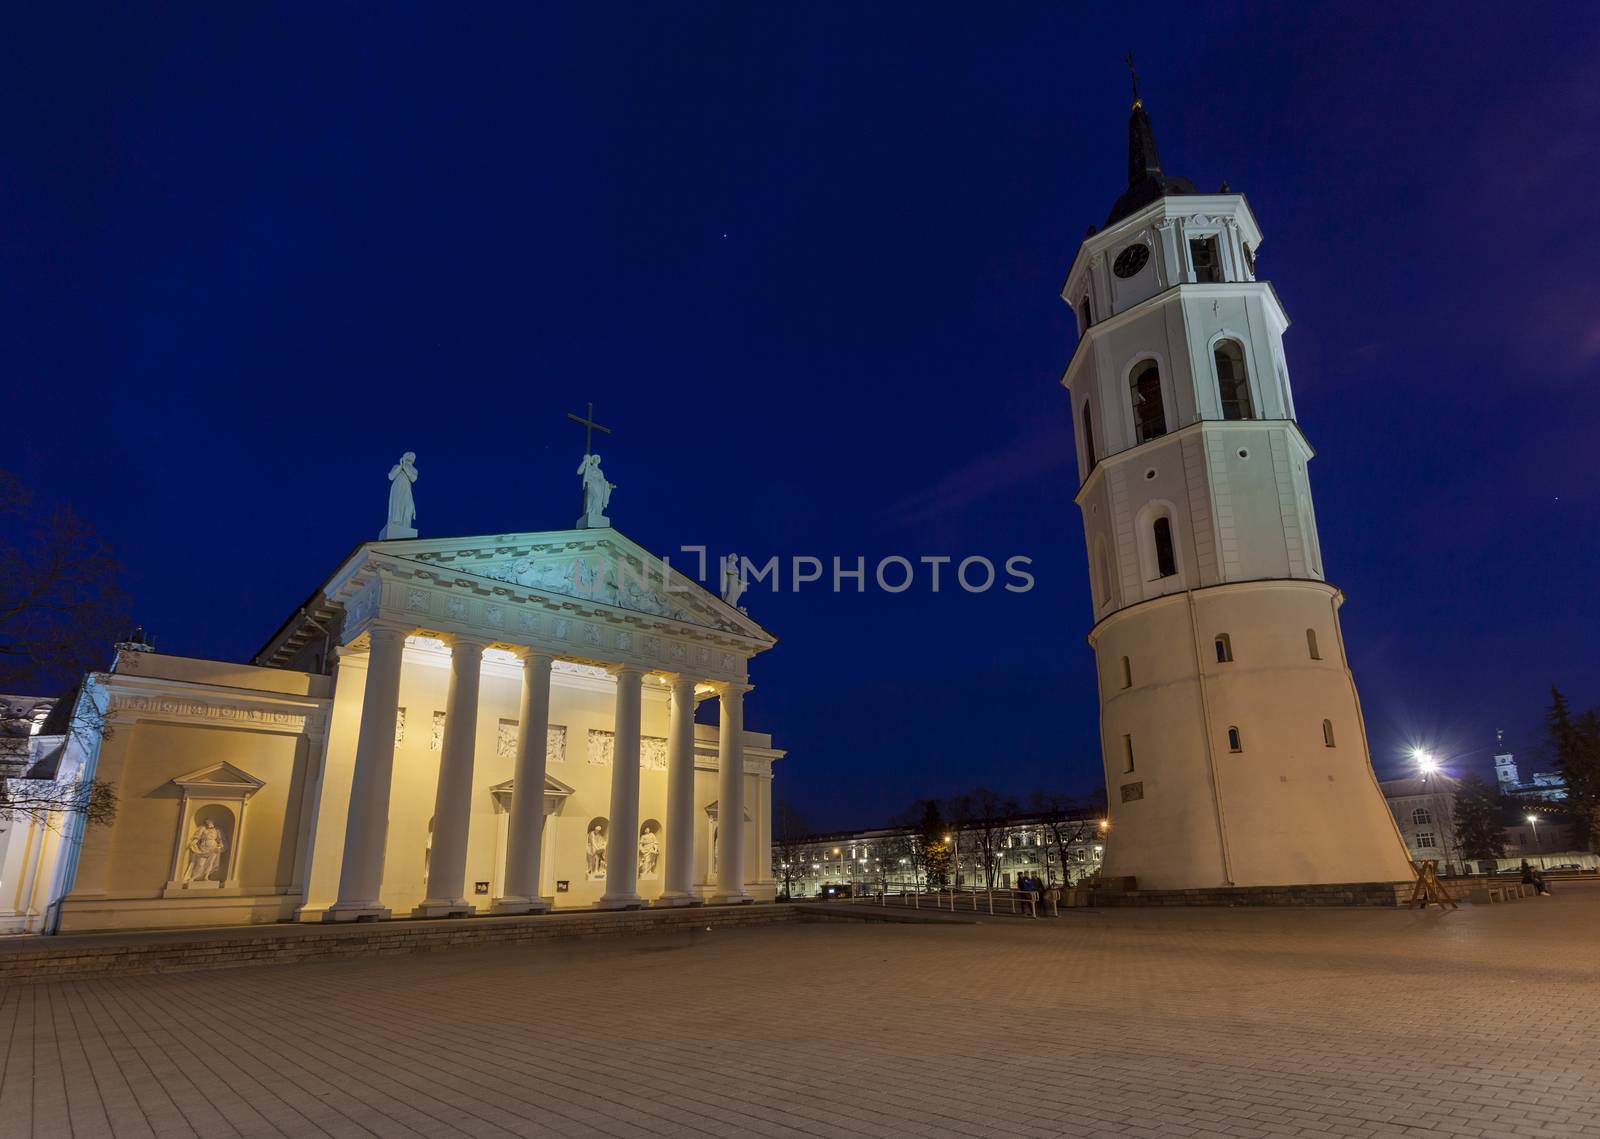 The Cathedral Square in central Vilnius during twilight time, Lithuania, Europe